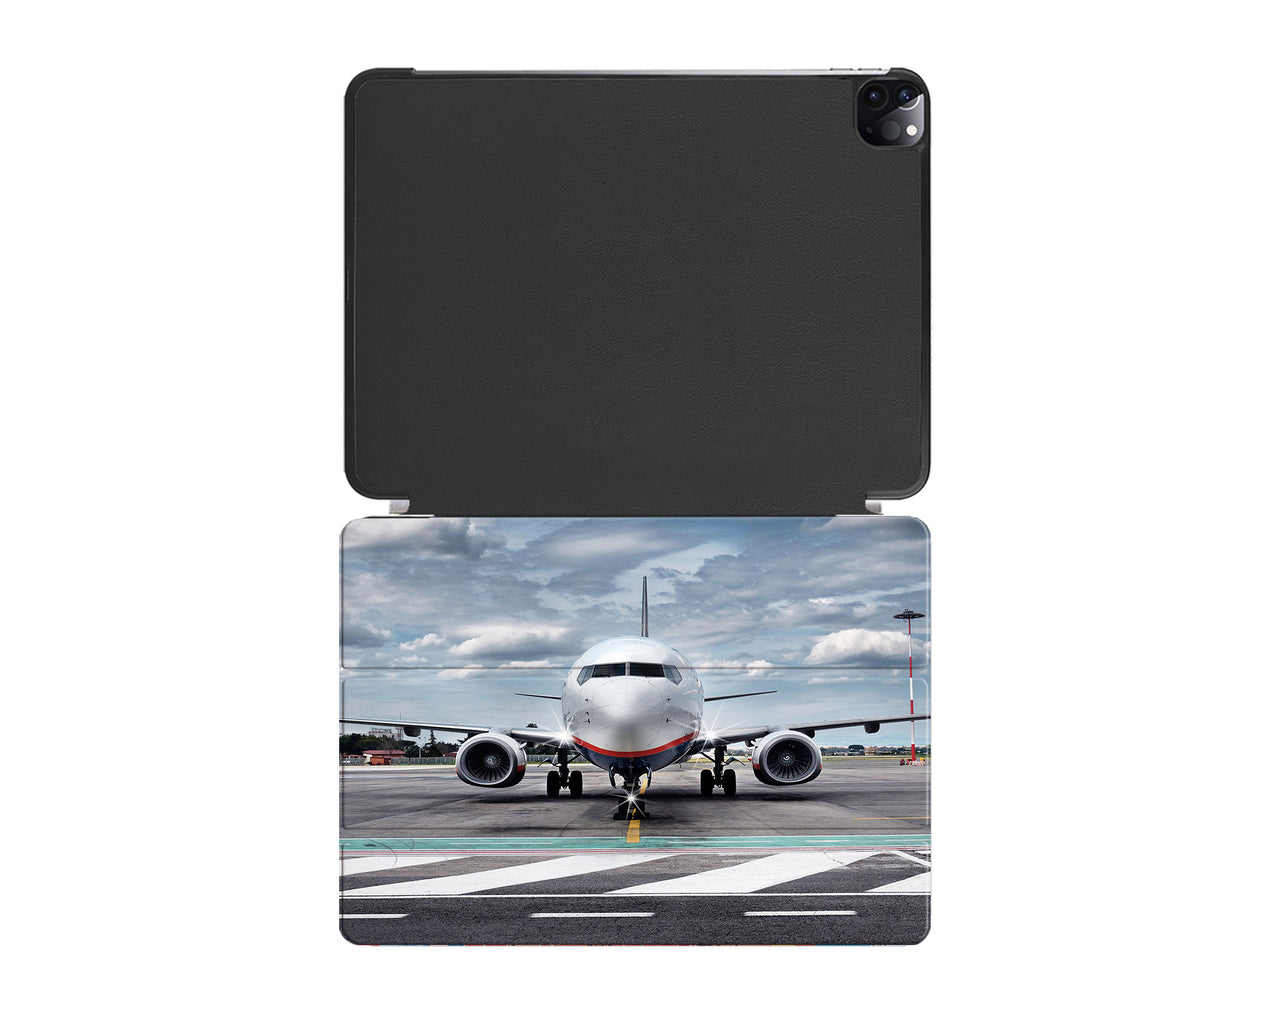 Amazing Clouds and Boeing 737 NG Designed iPad Cases